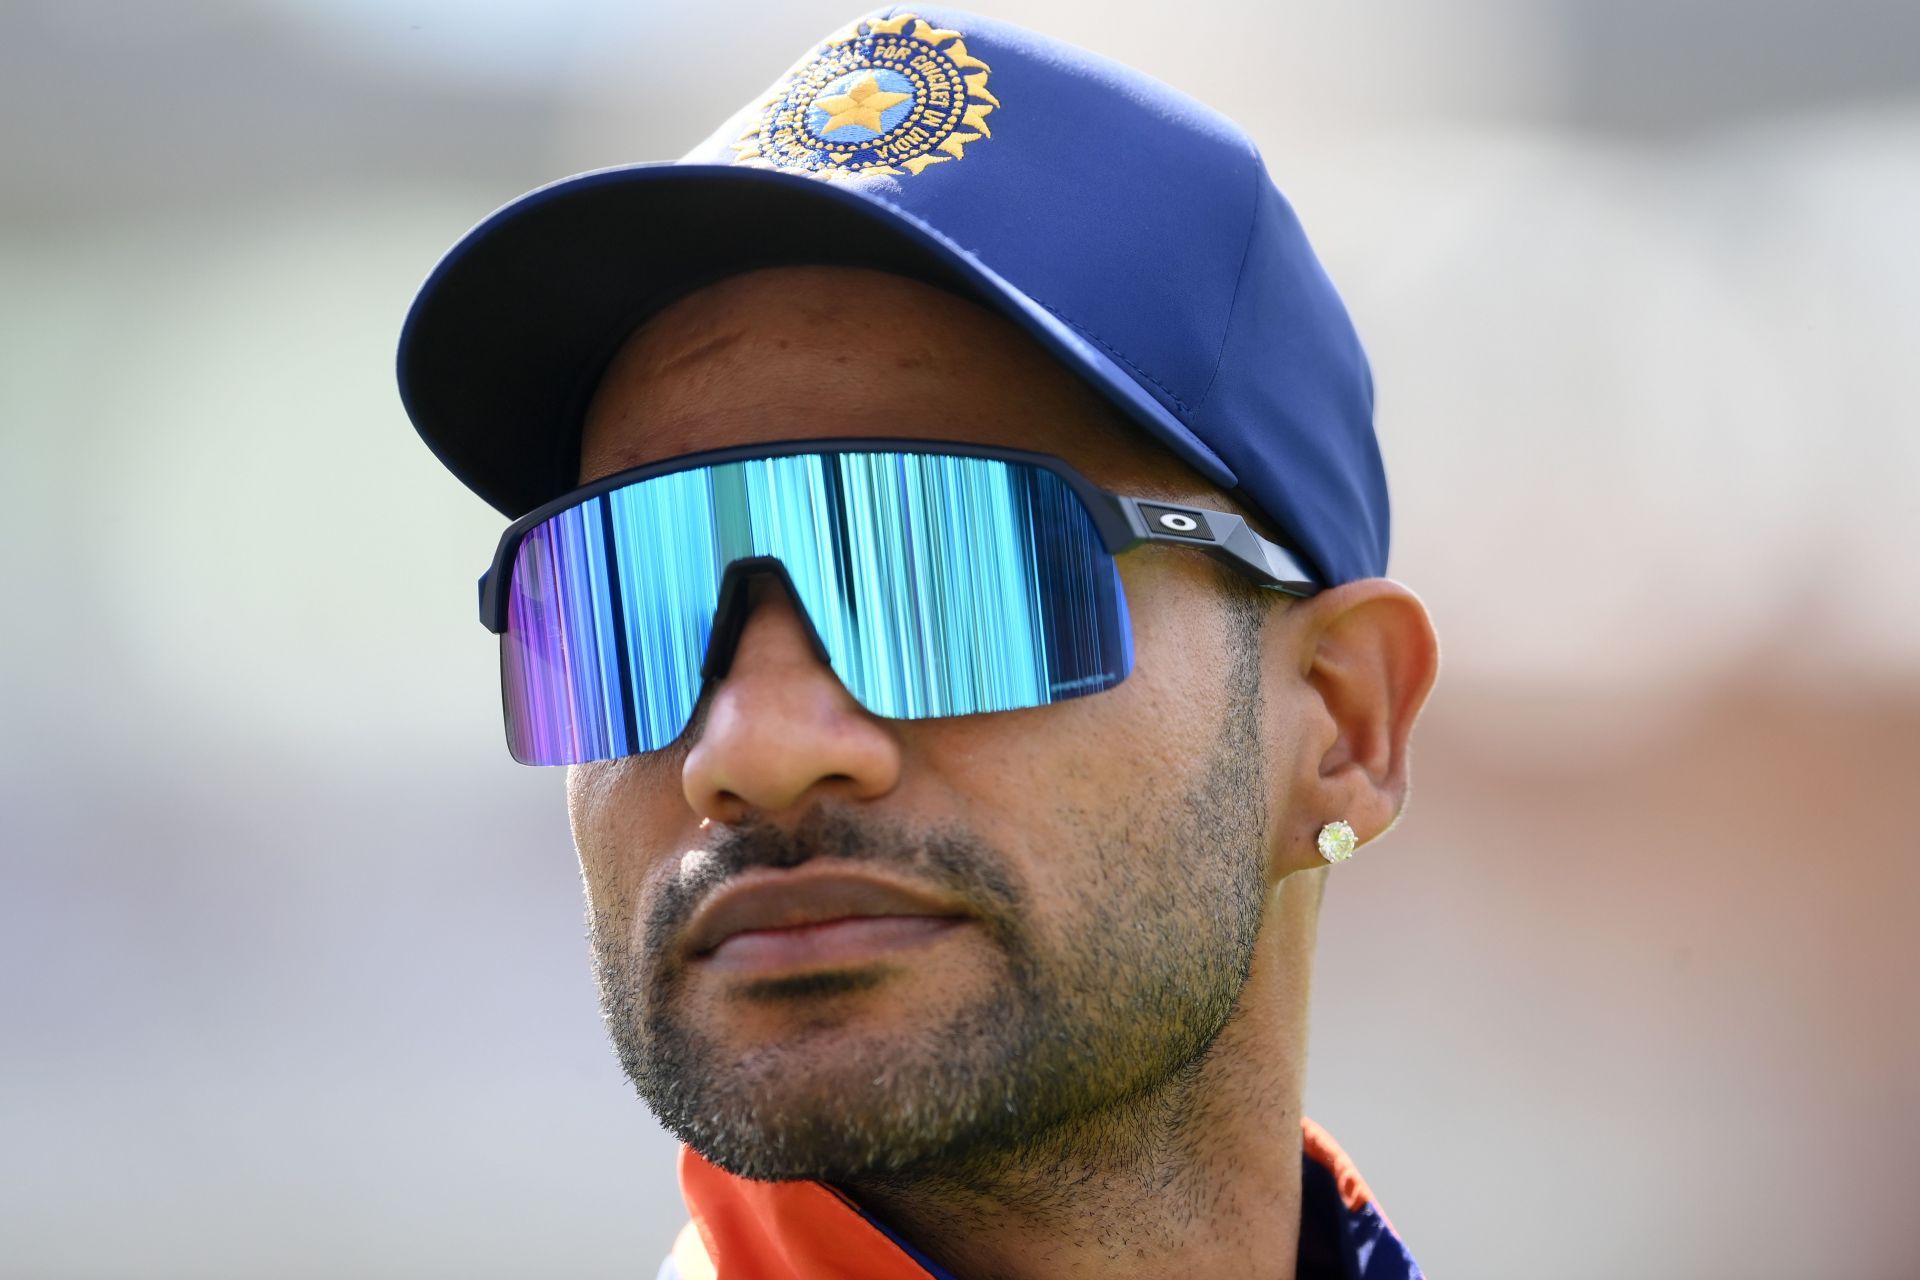 Shikhar Dhawan will lead the Indian team in their upcoming three-match series (Image: Getty)